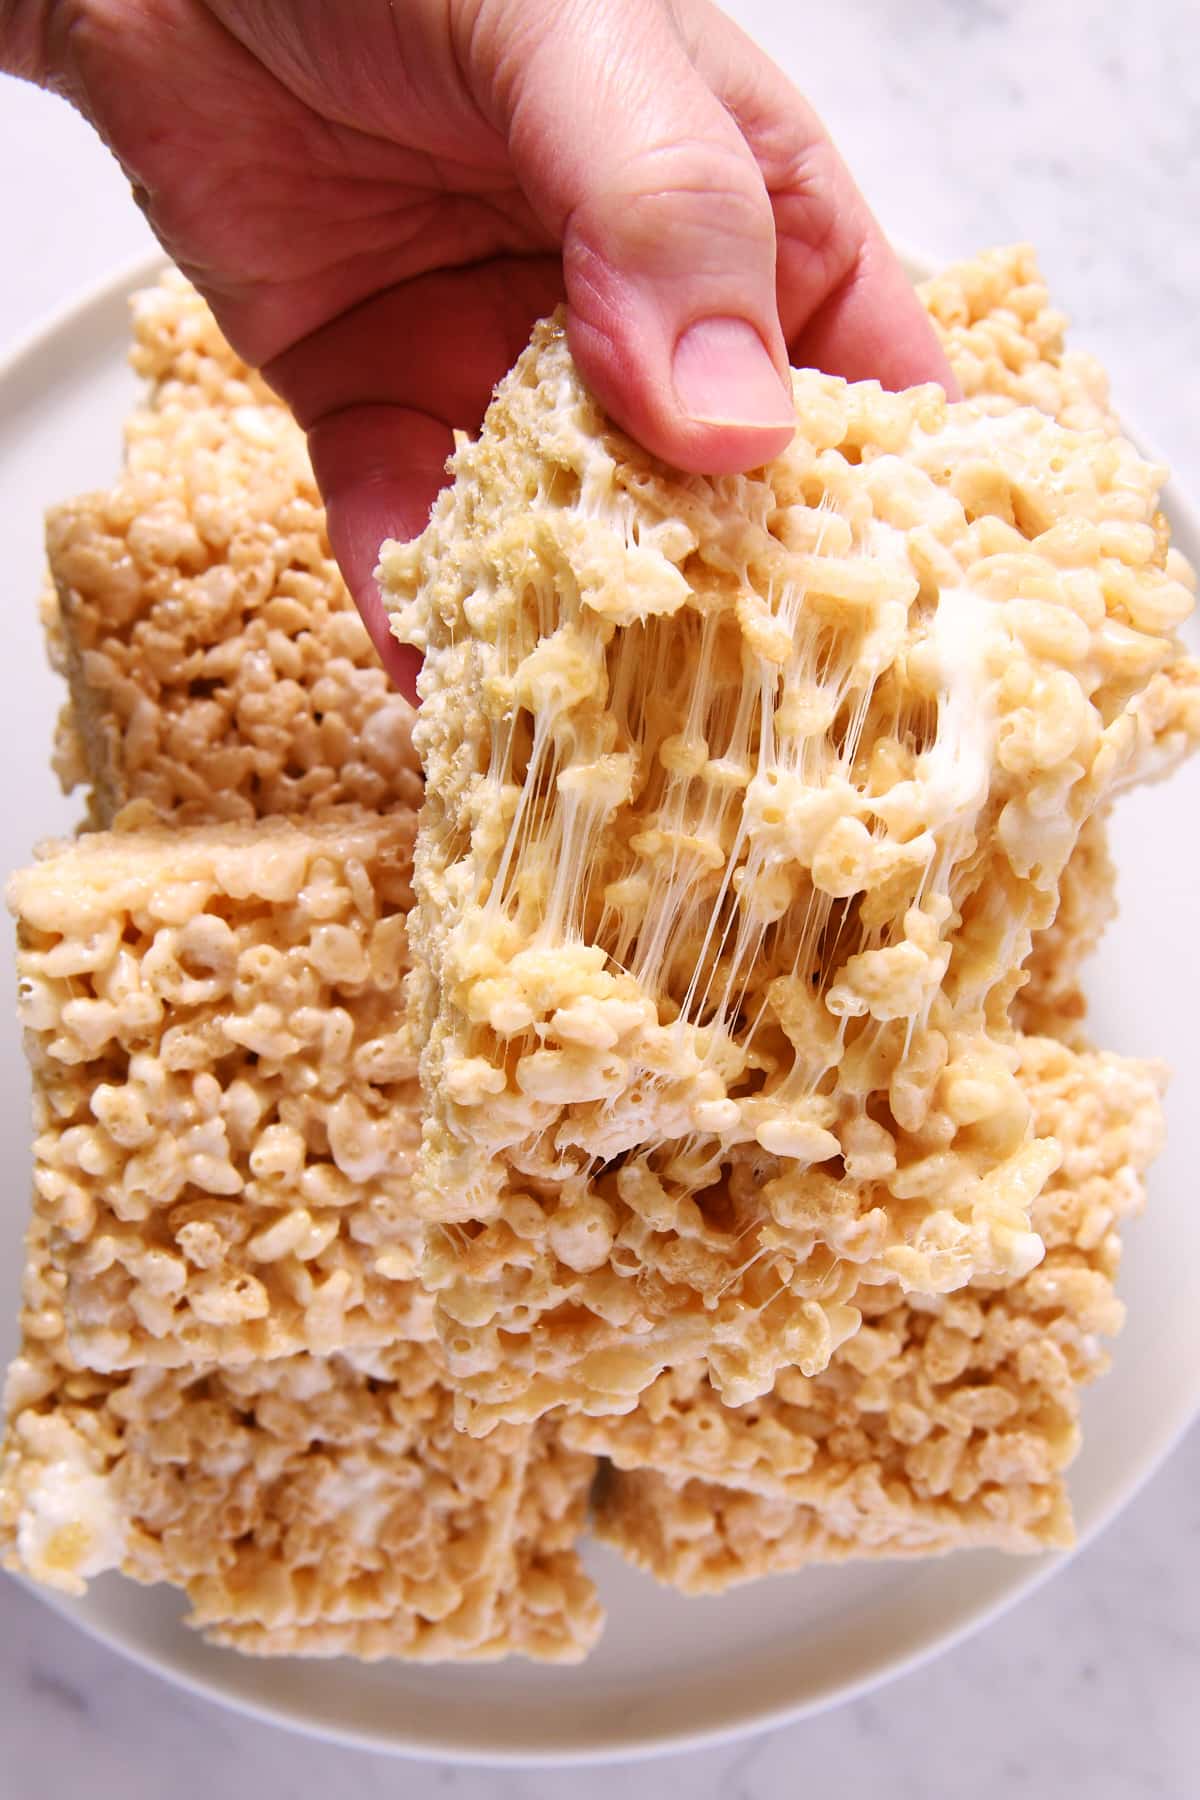 Rice cereal treats stacked on a white cake plate with one treat pulled apart to show the gooey marshmallow.